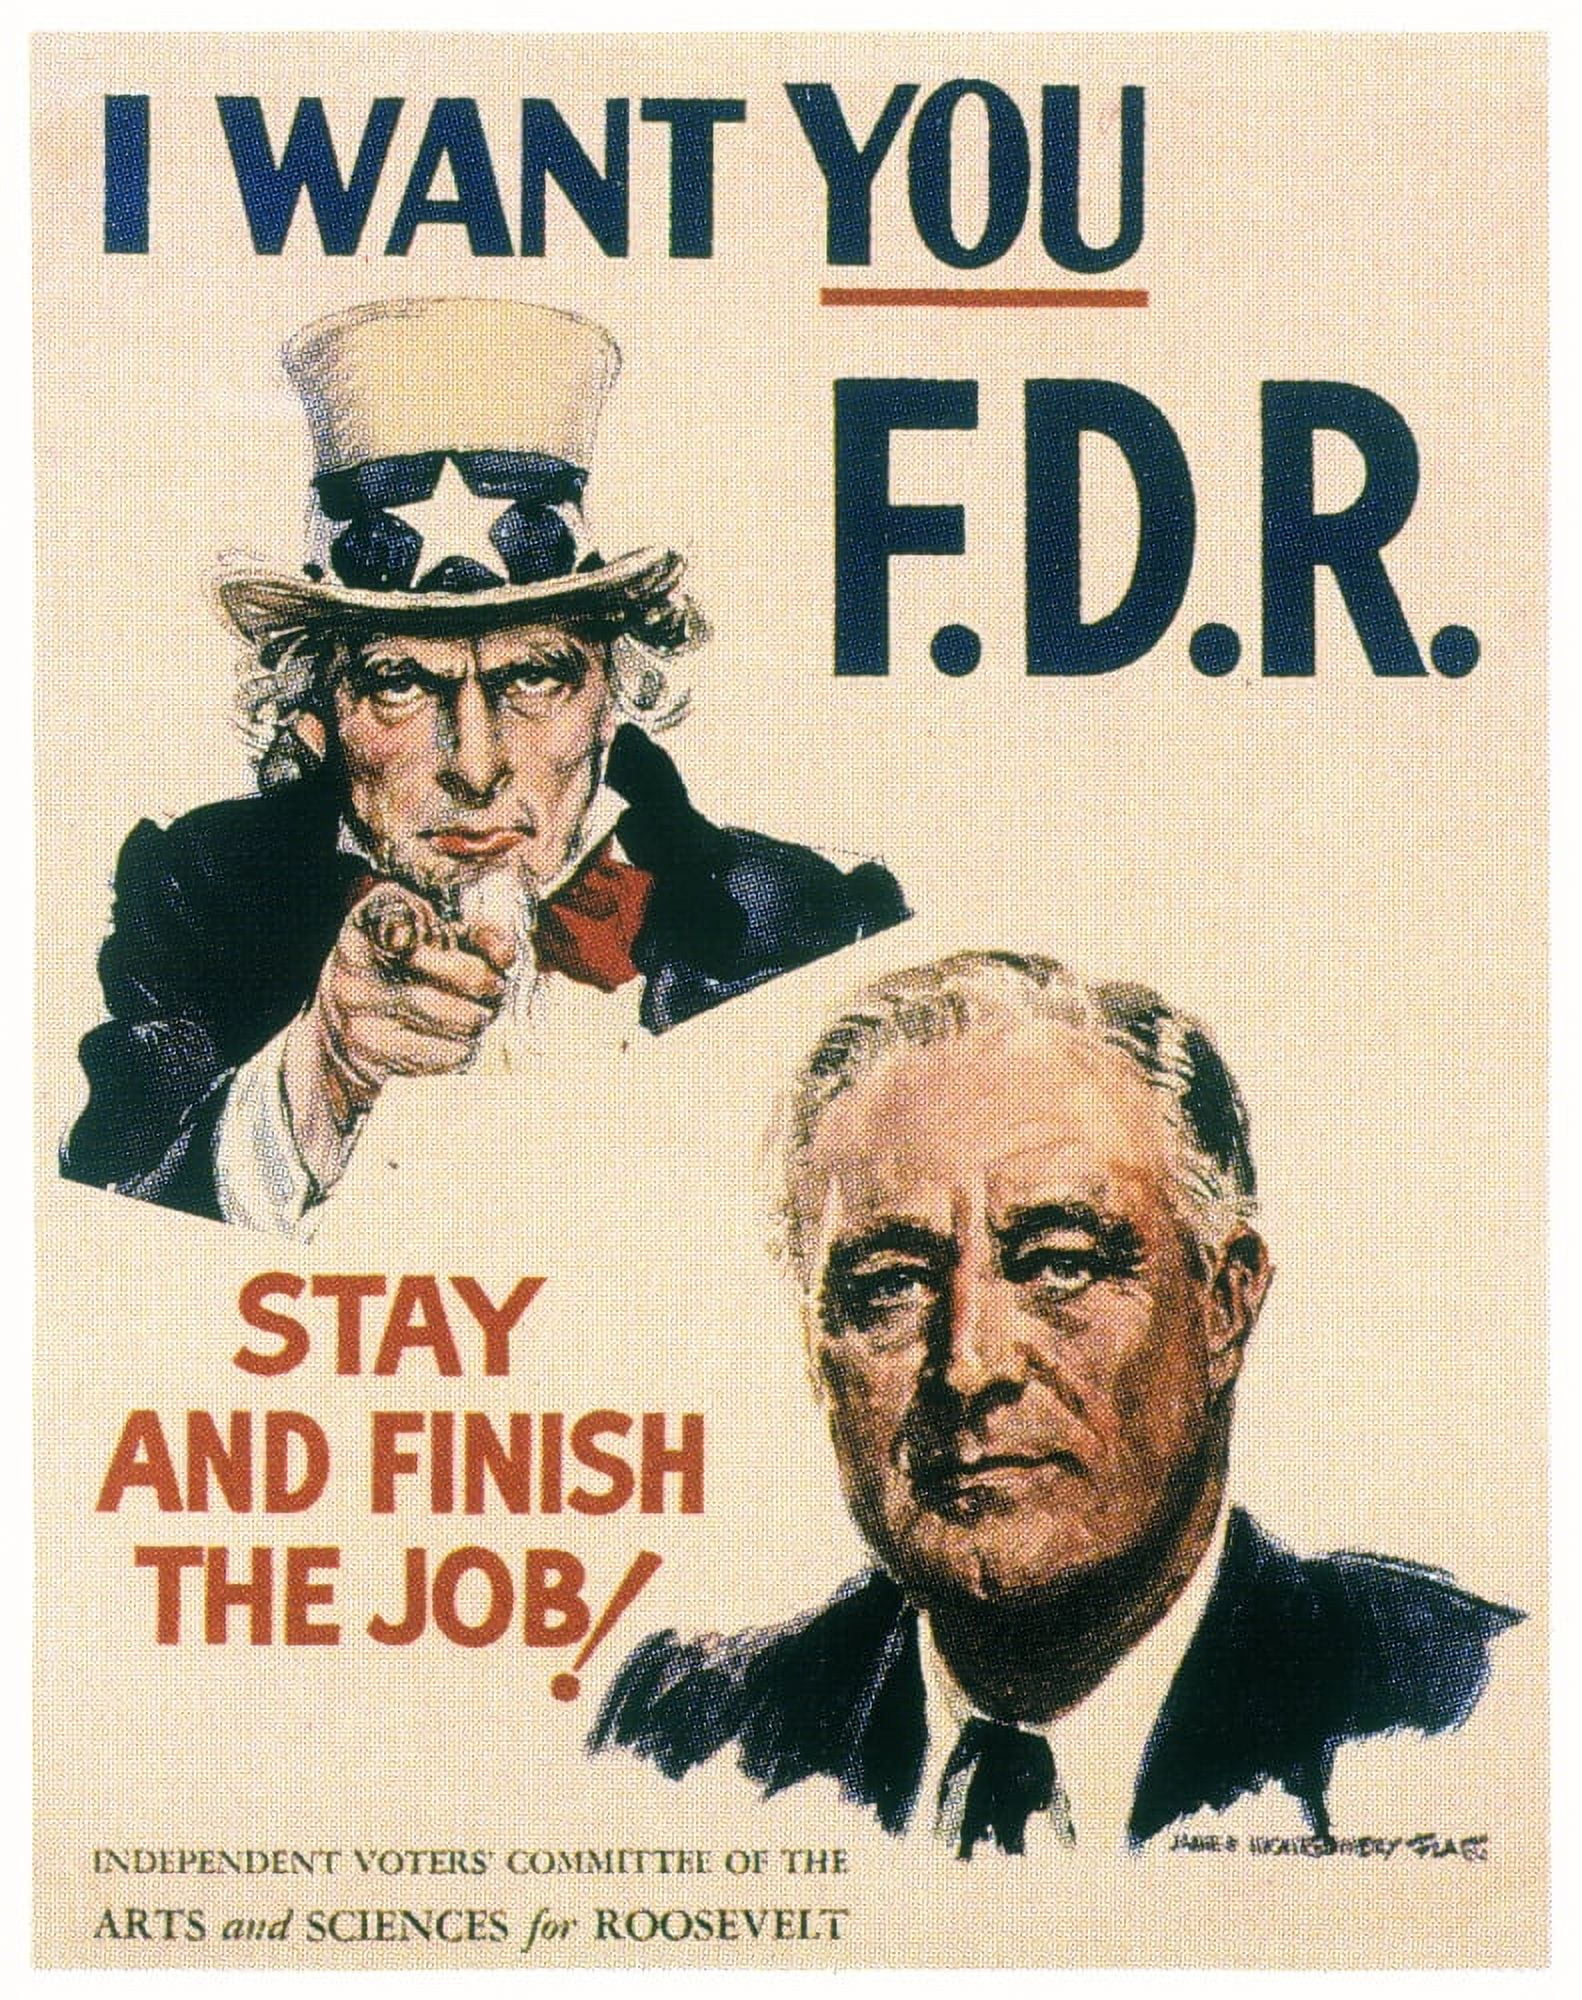 Presidential-Campaign-1940-Nposter-By-James-Montgomery-Flagg-From-The-1940-Supporting-Re-Election-Of-President-Franklin-D-Roosevelt-Poster-Print-18-x_61c121f1-9604-4539-aedc-018eaad4a380.89e98a5bc08dd503bc482be95f975266.jpeg